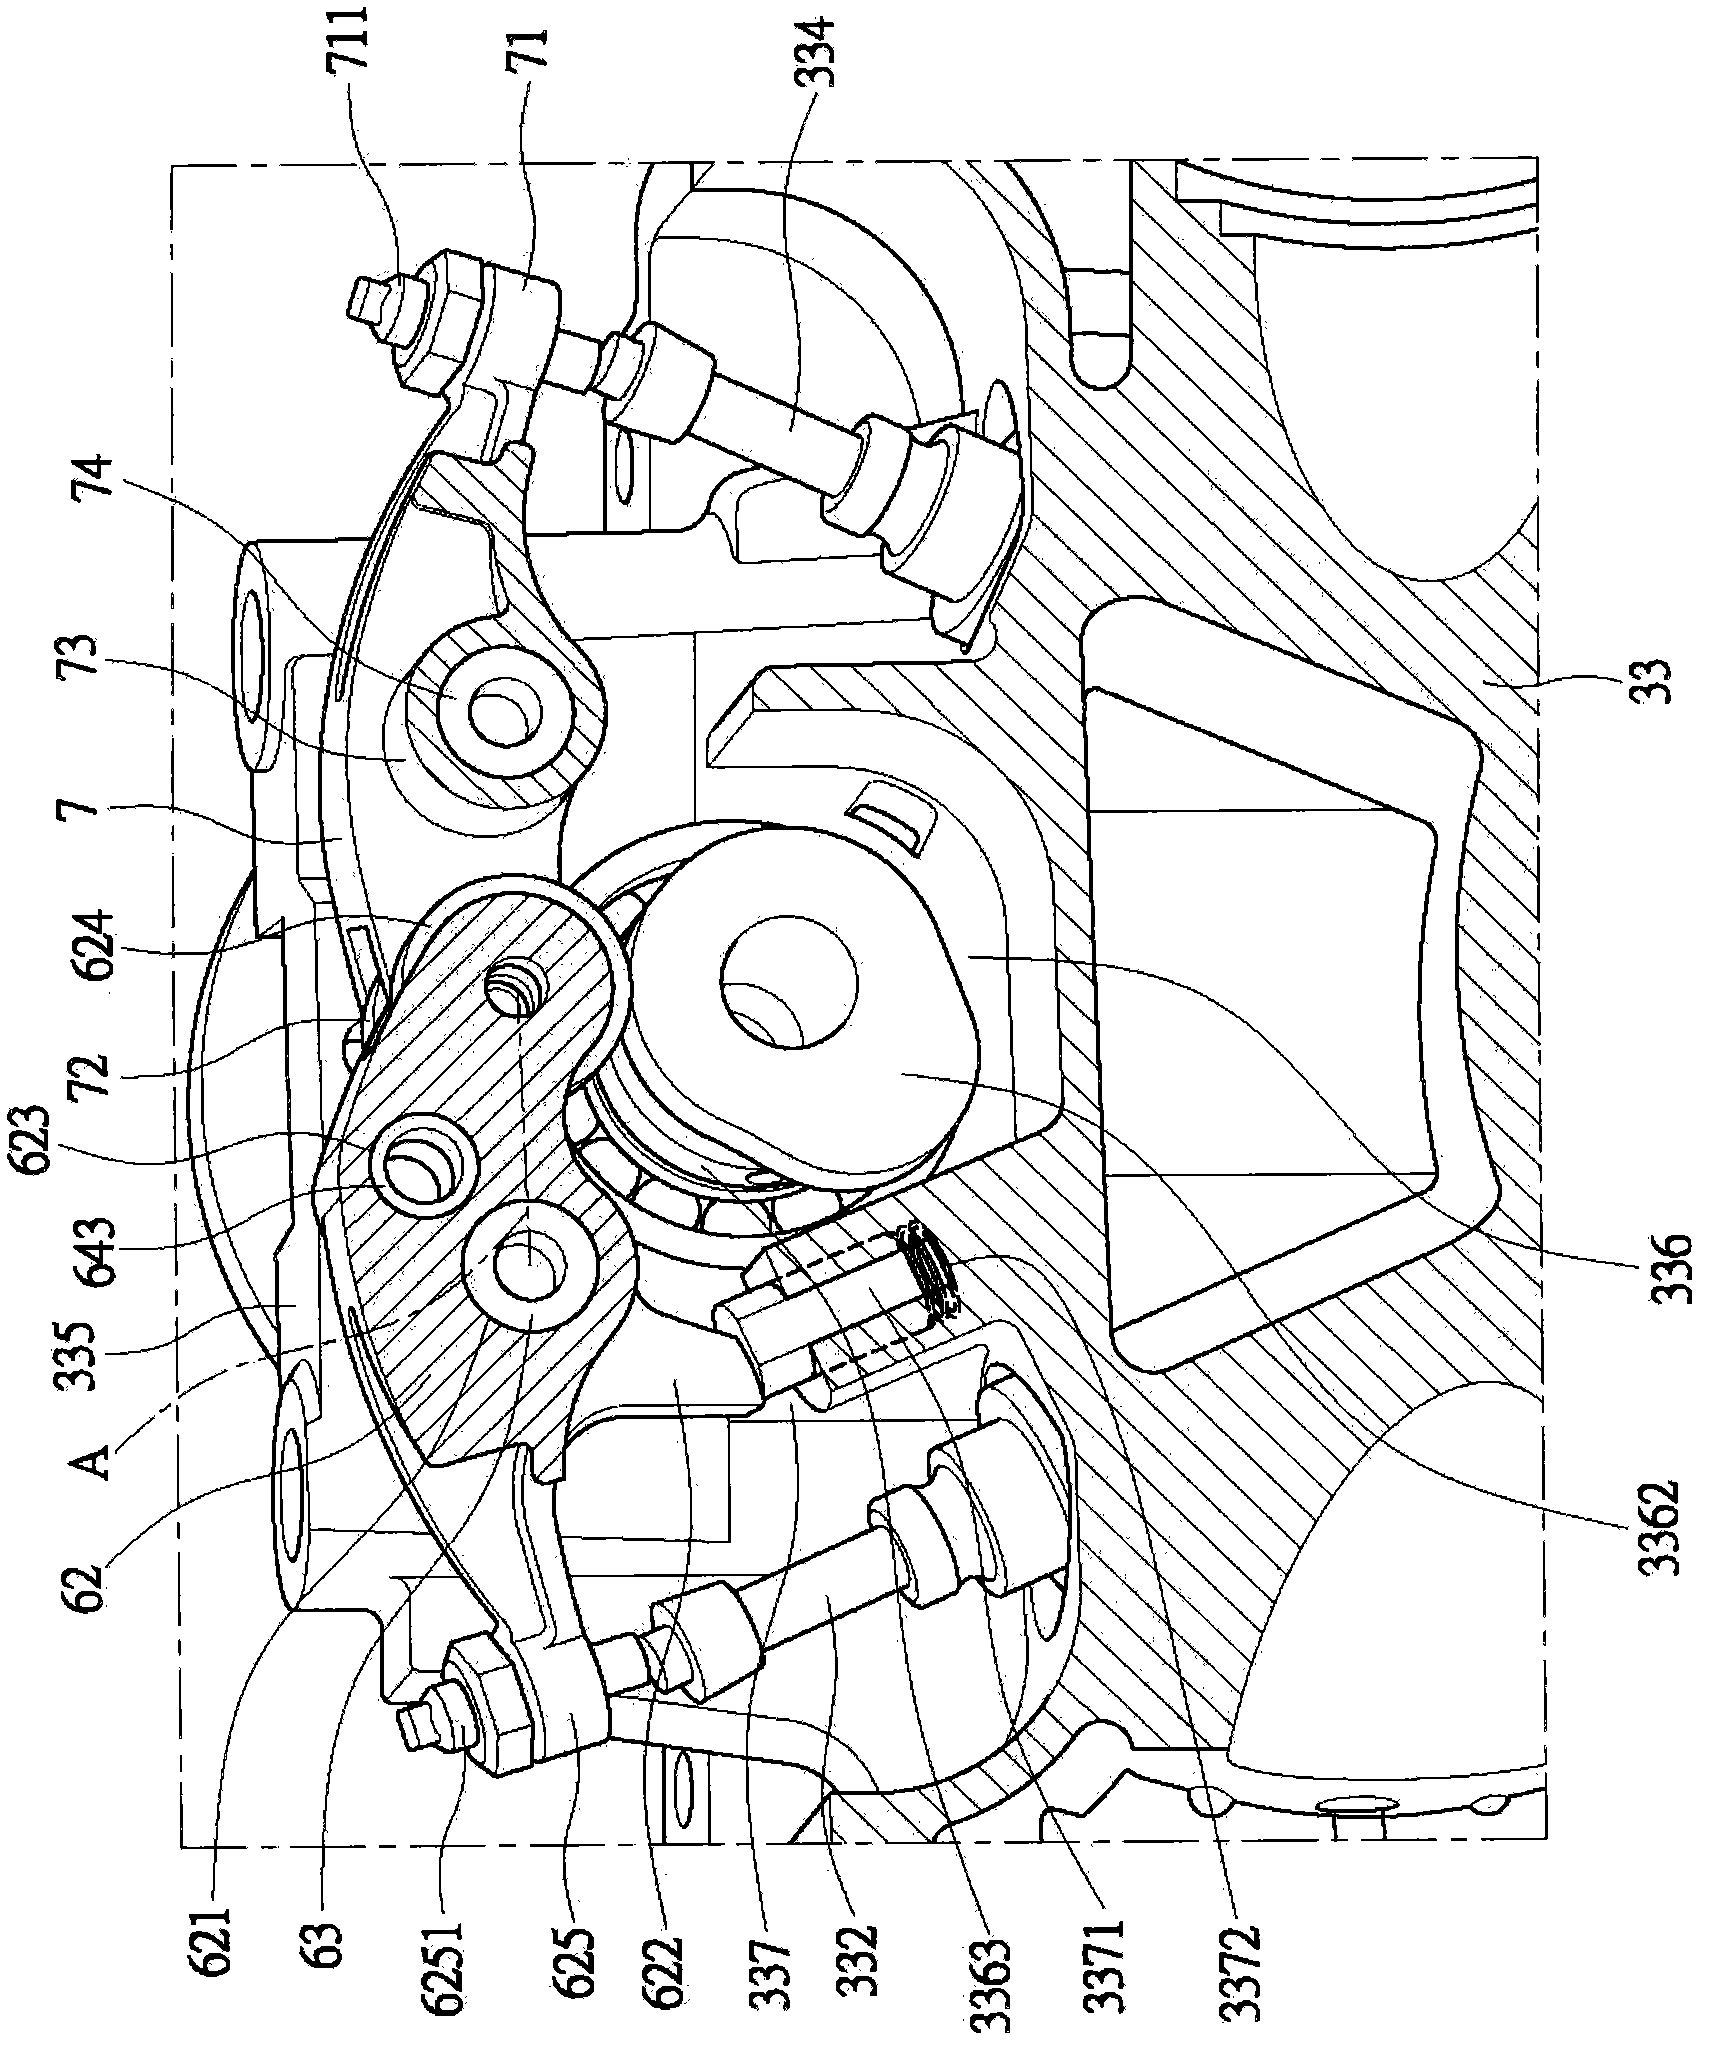 Variable vehicle lift mechanism of engine